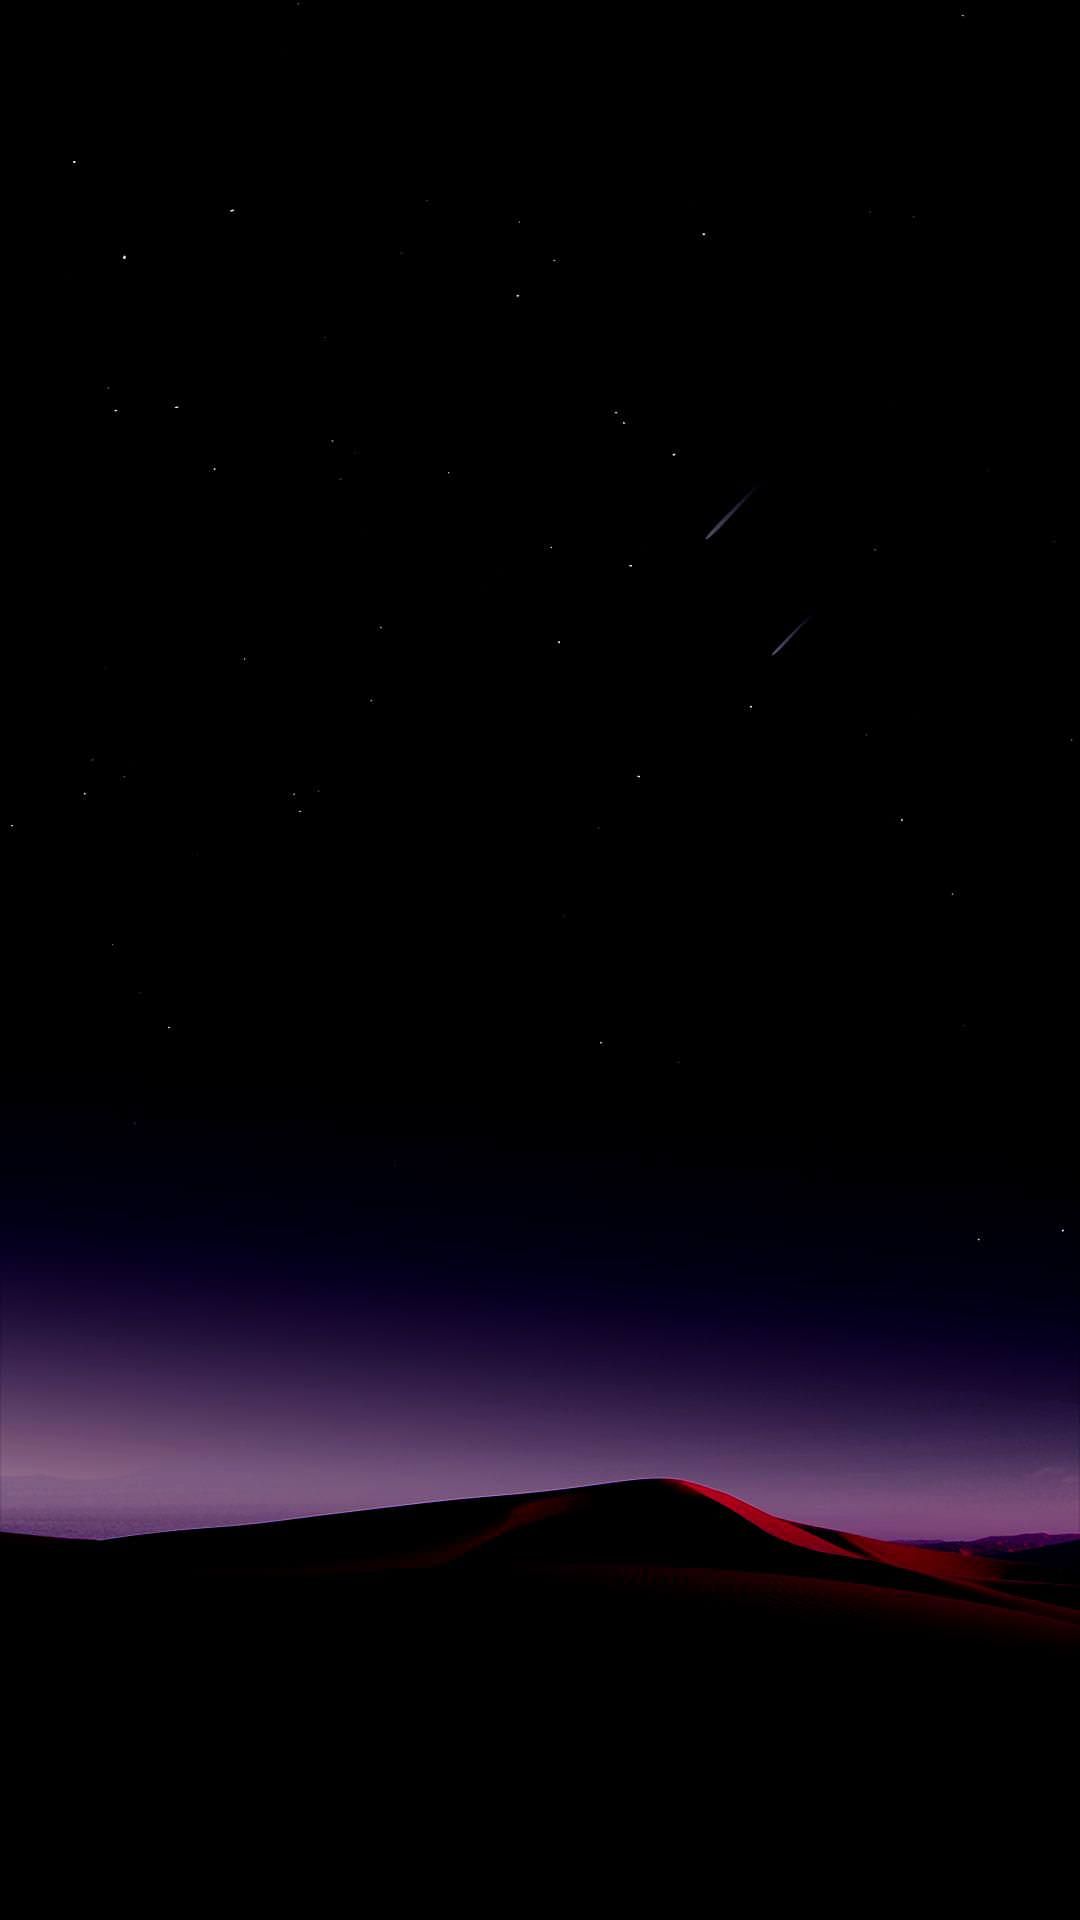 Galaxy S20 Amoled Wallpapers